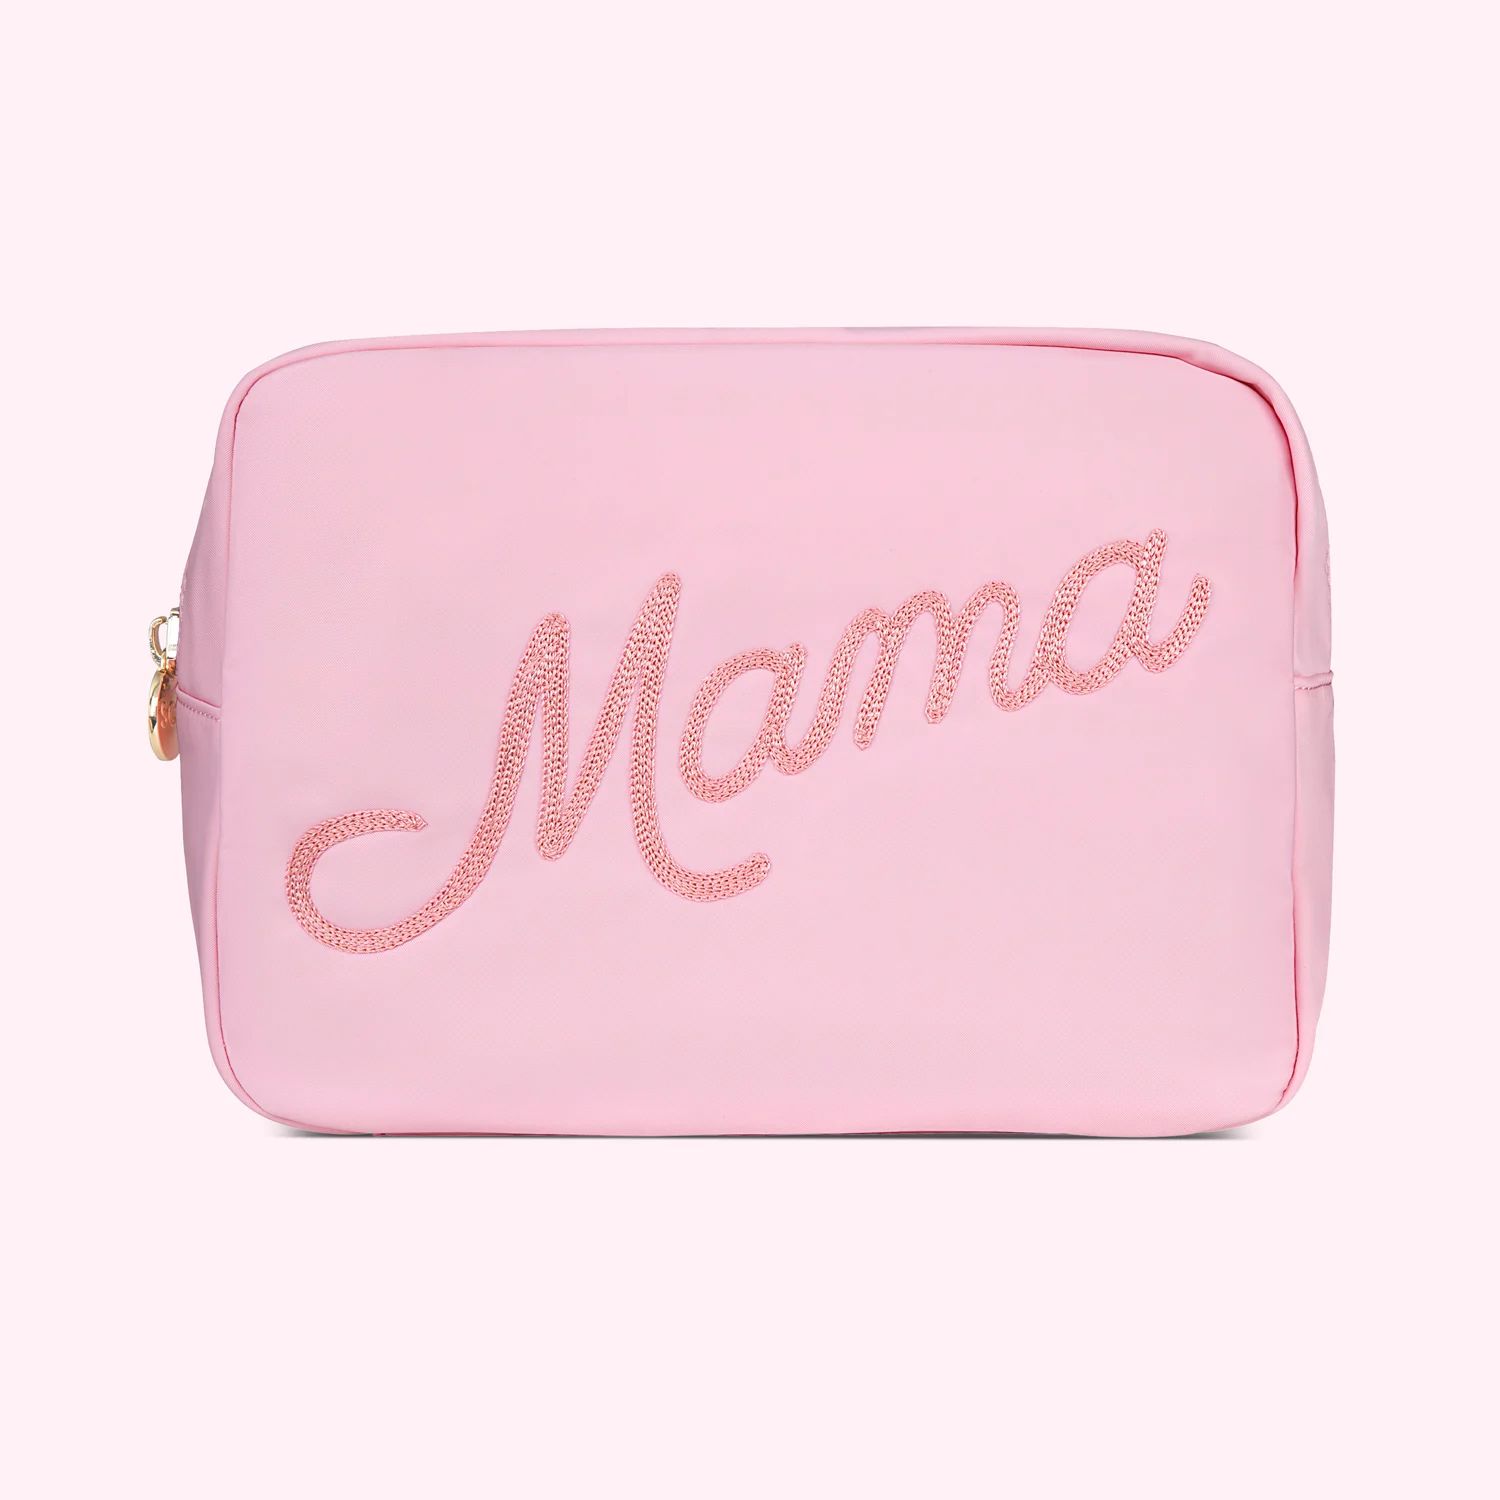 Mama Large Pouch | Customizable Large Pouch - Stoney Clover Lane | Stoney Clover Lane